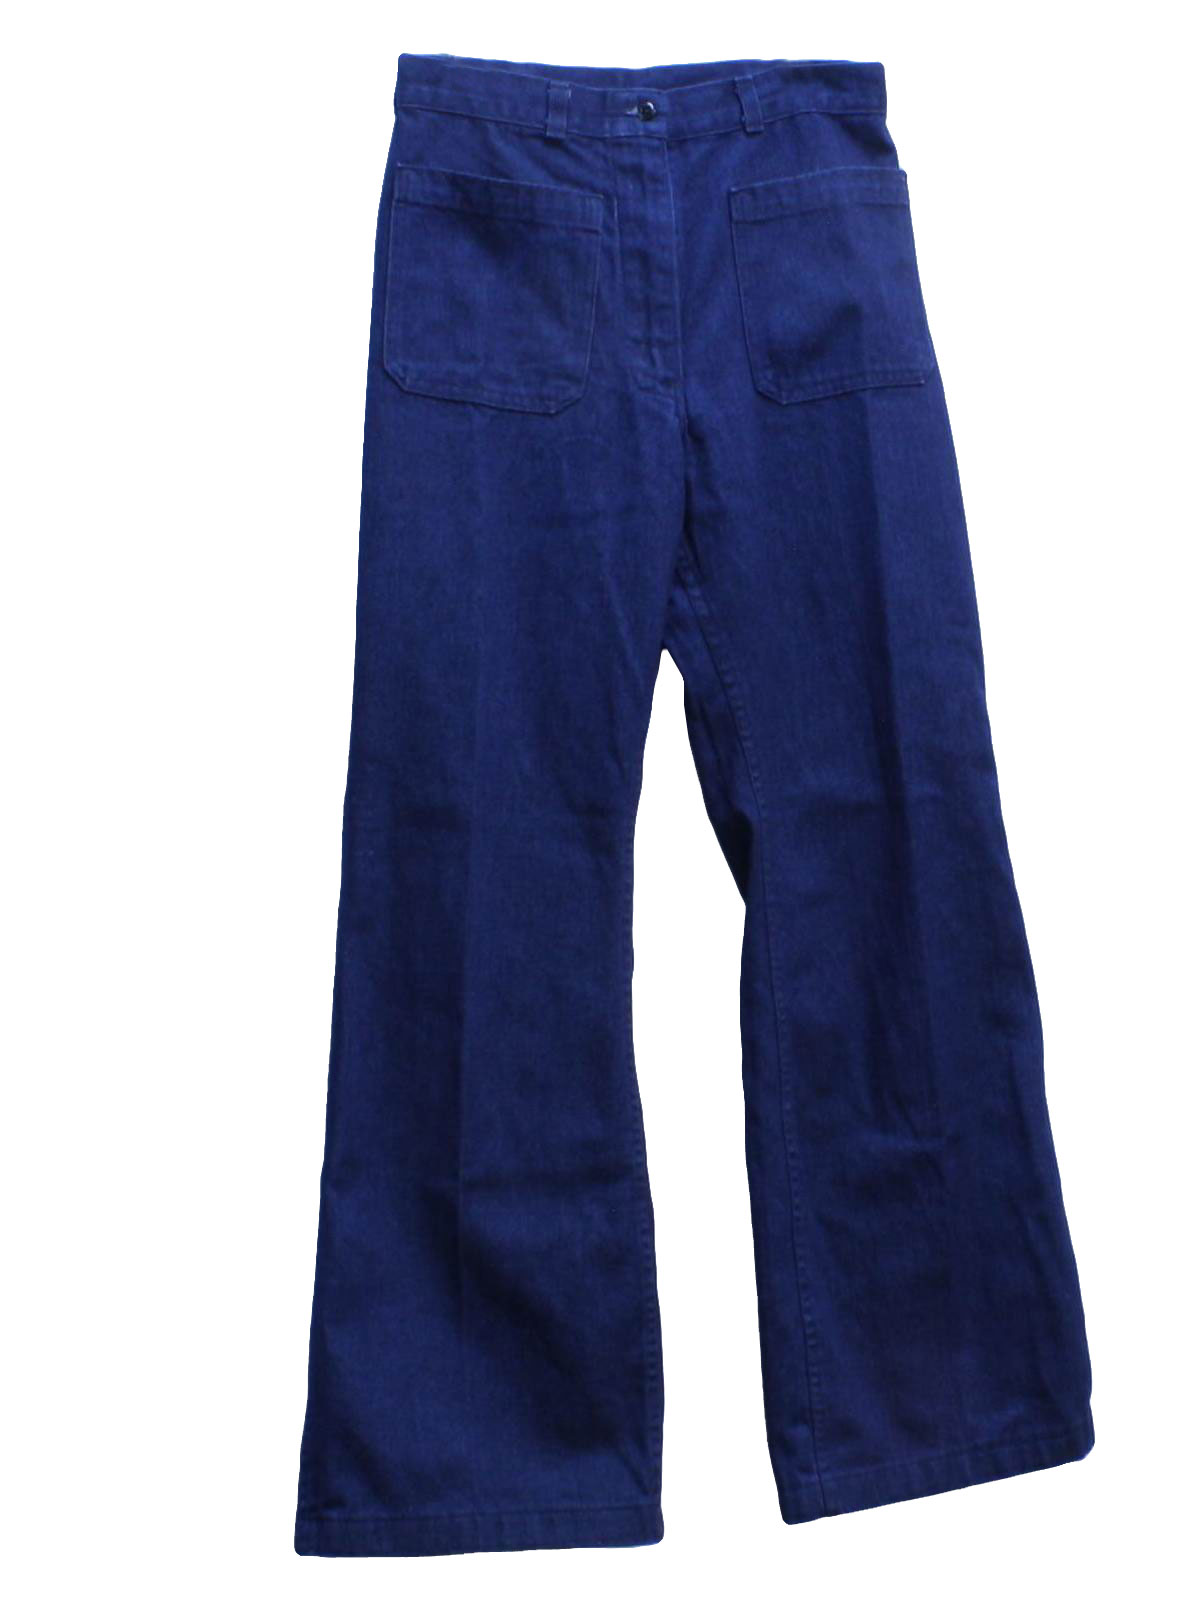 Retro 70's Bellbottom Pants: 70s -Seagoing Uniform Corp- Womens faded ...